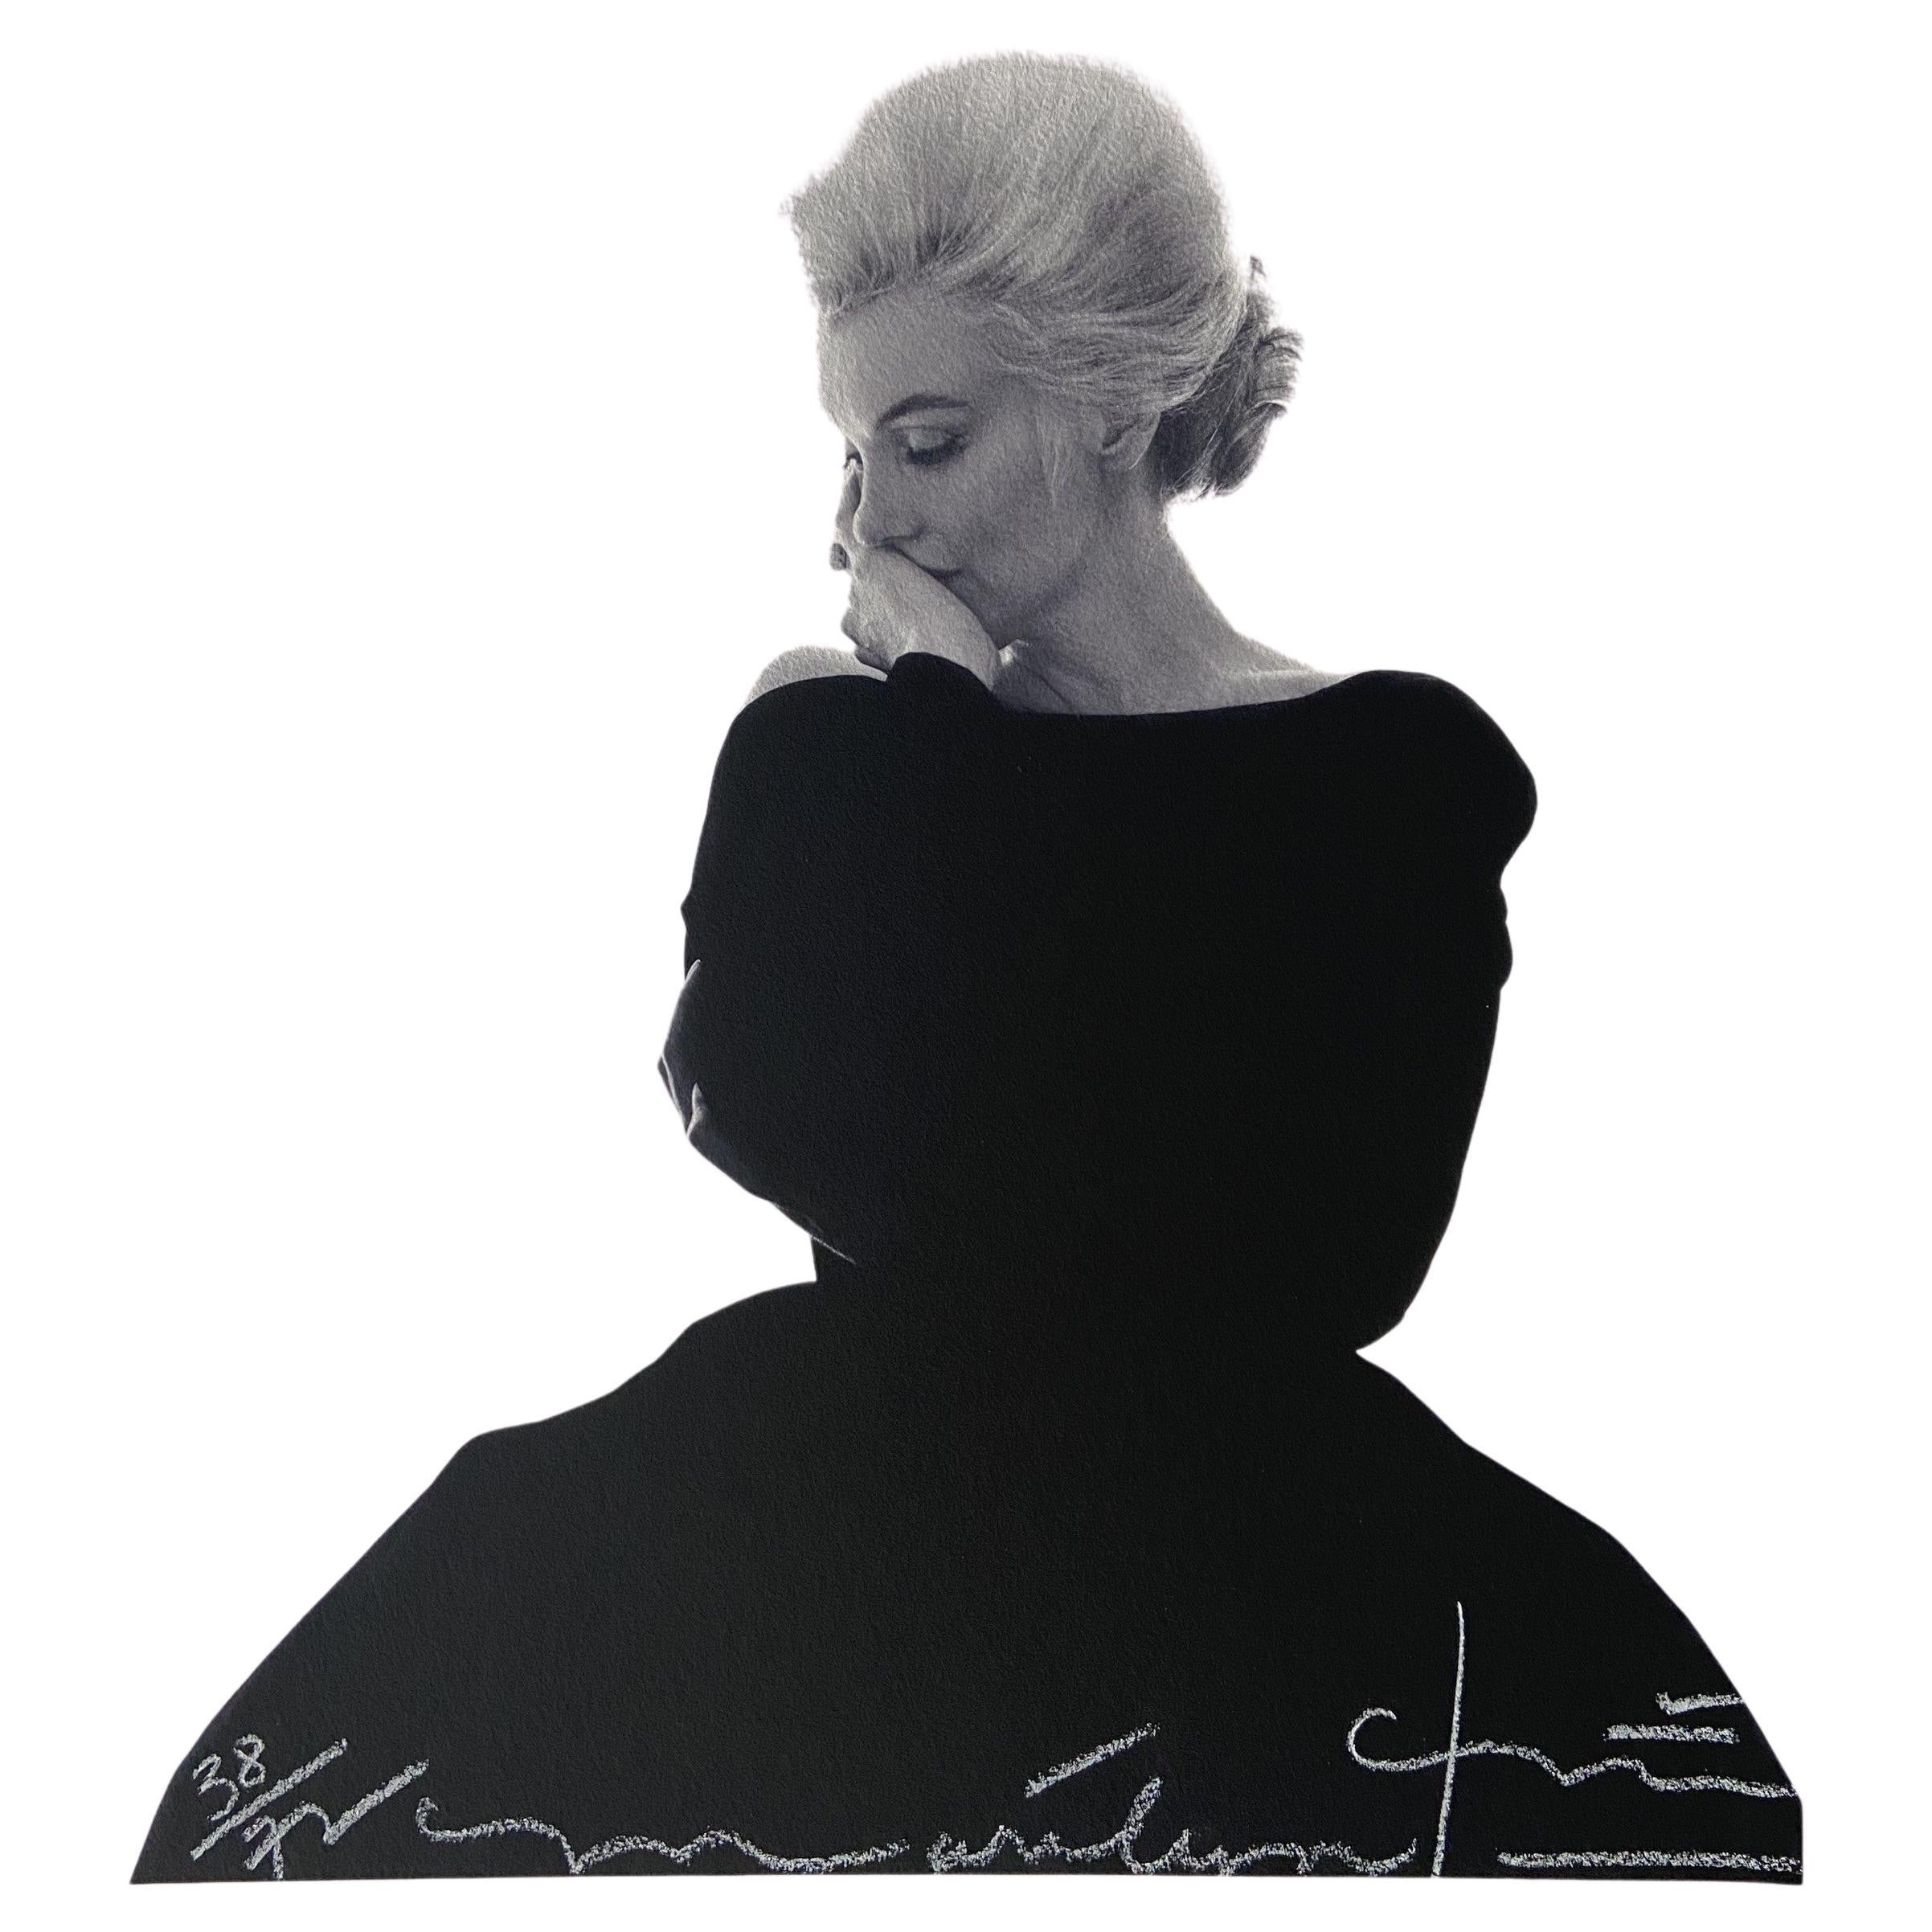 Work sold in perfect condition.

Paper size : 33 x 48cm Photo of 1962 Print 2010 The photos of Marilyn were taken during the famous last sitting, which took place between Bert Stern and Marilyn Monroe. This was her last sitting before her death in